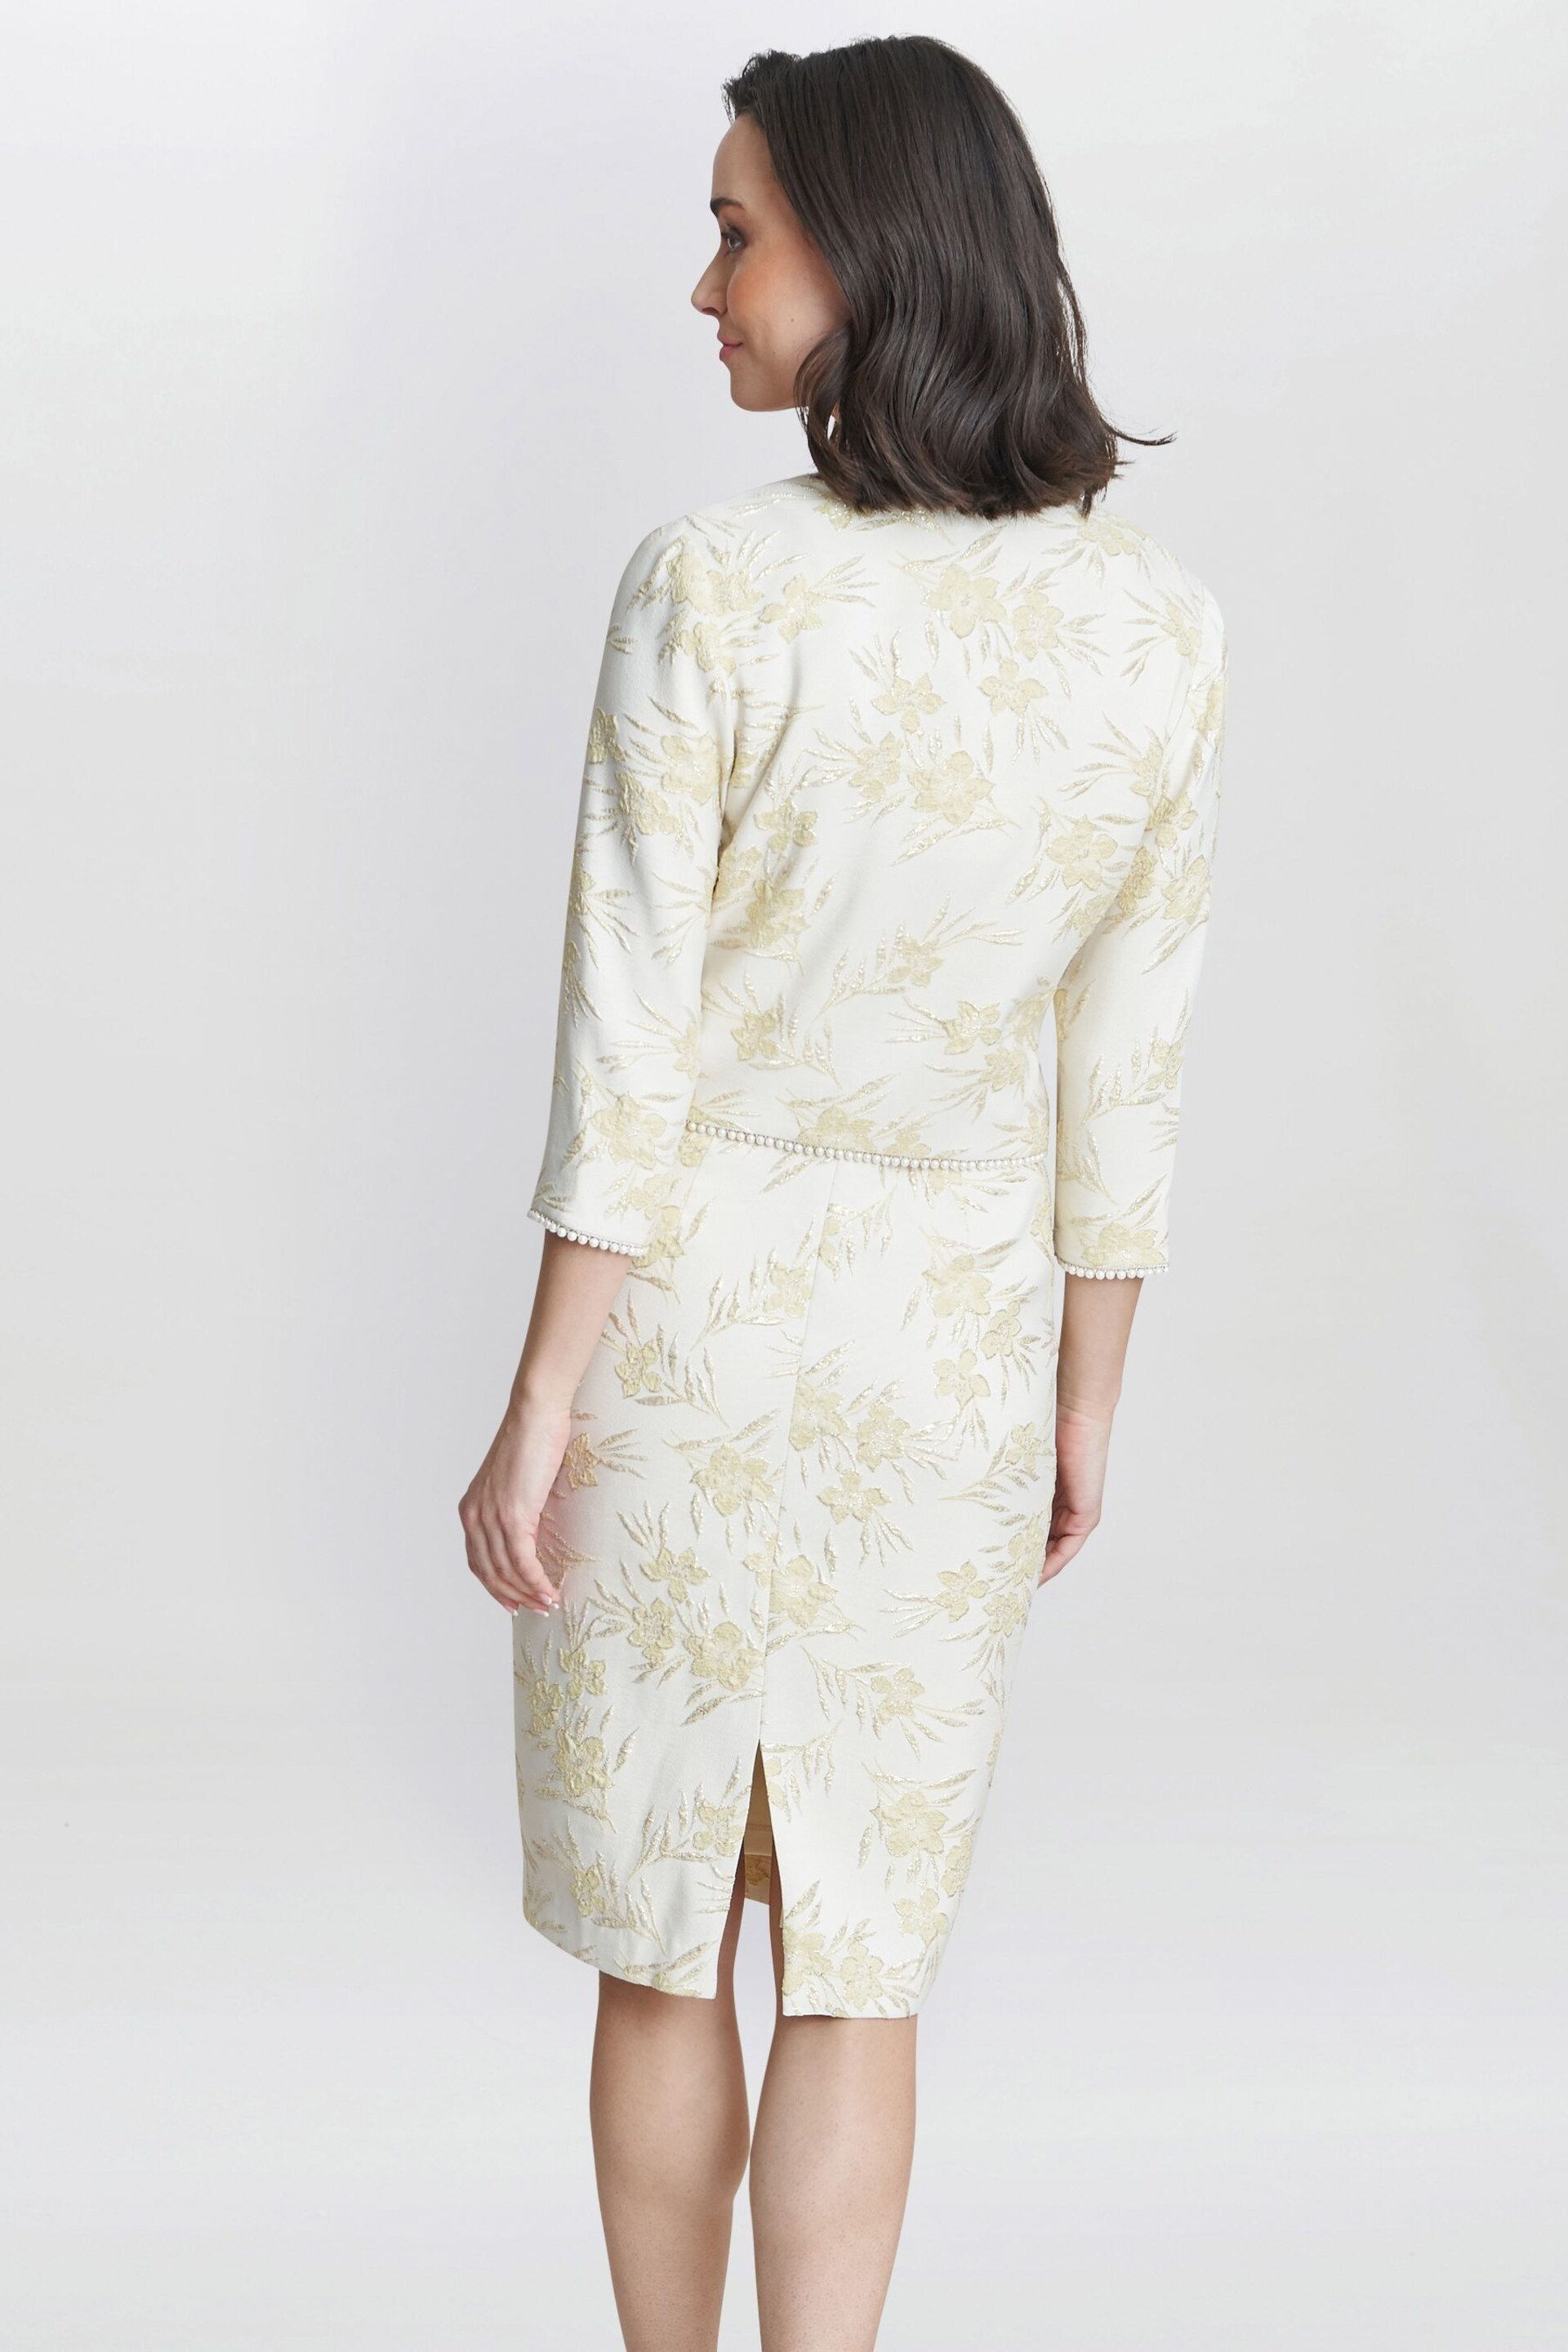 Gina Bacconi Yellow Lindsay Dress And Jacket With Pearl Trim - Image 2 of 6